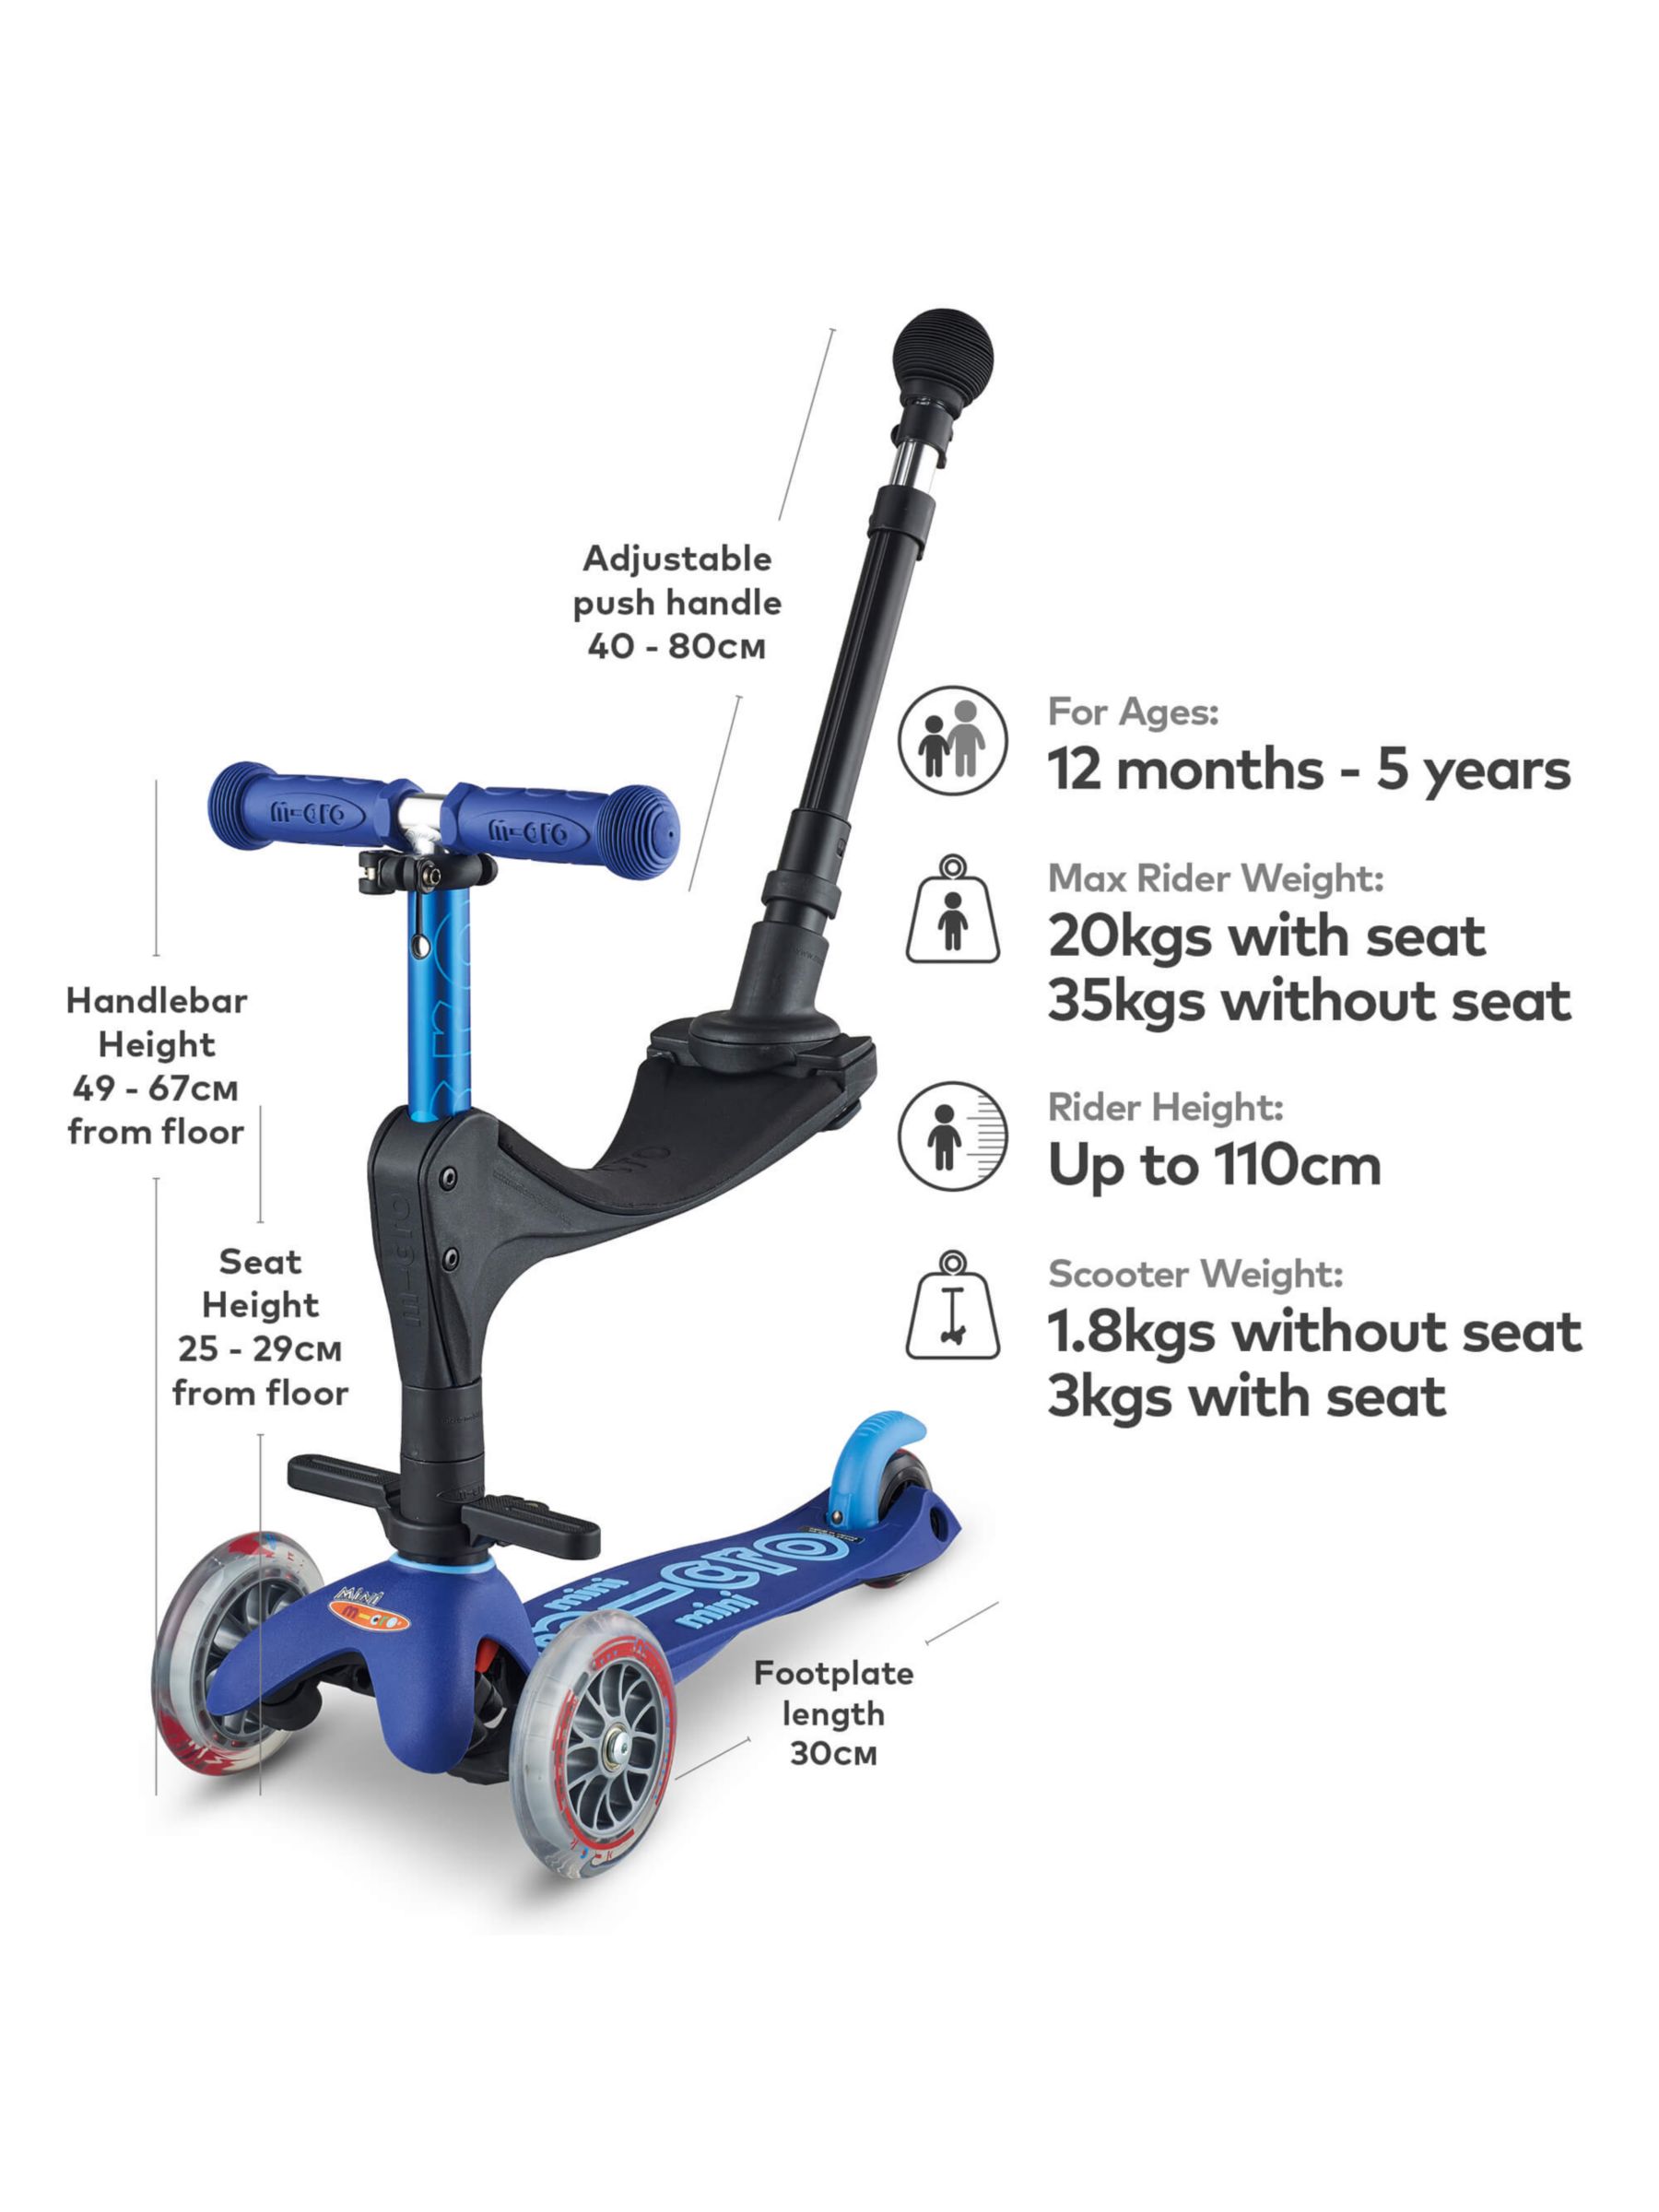 micro scooter for 1 year old